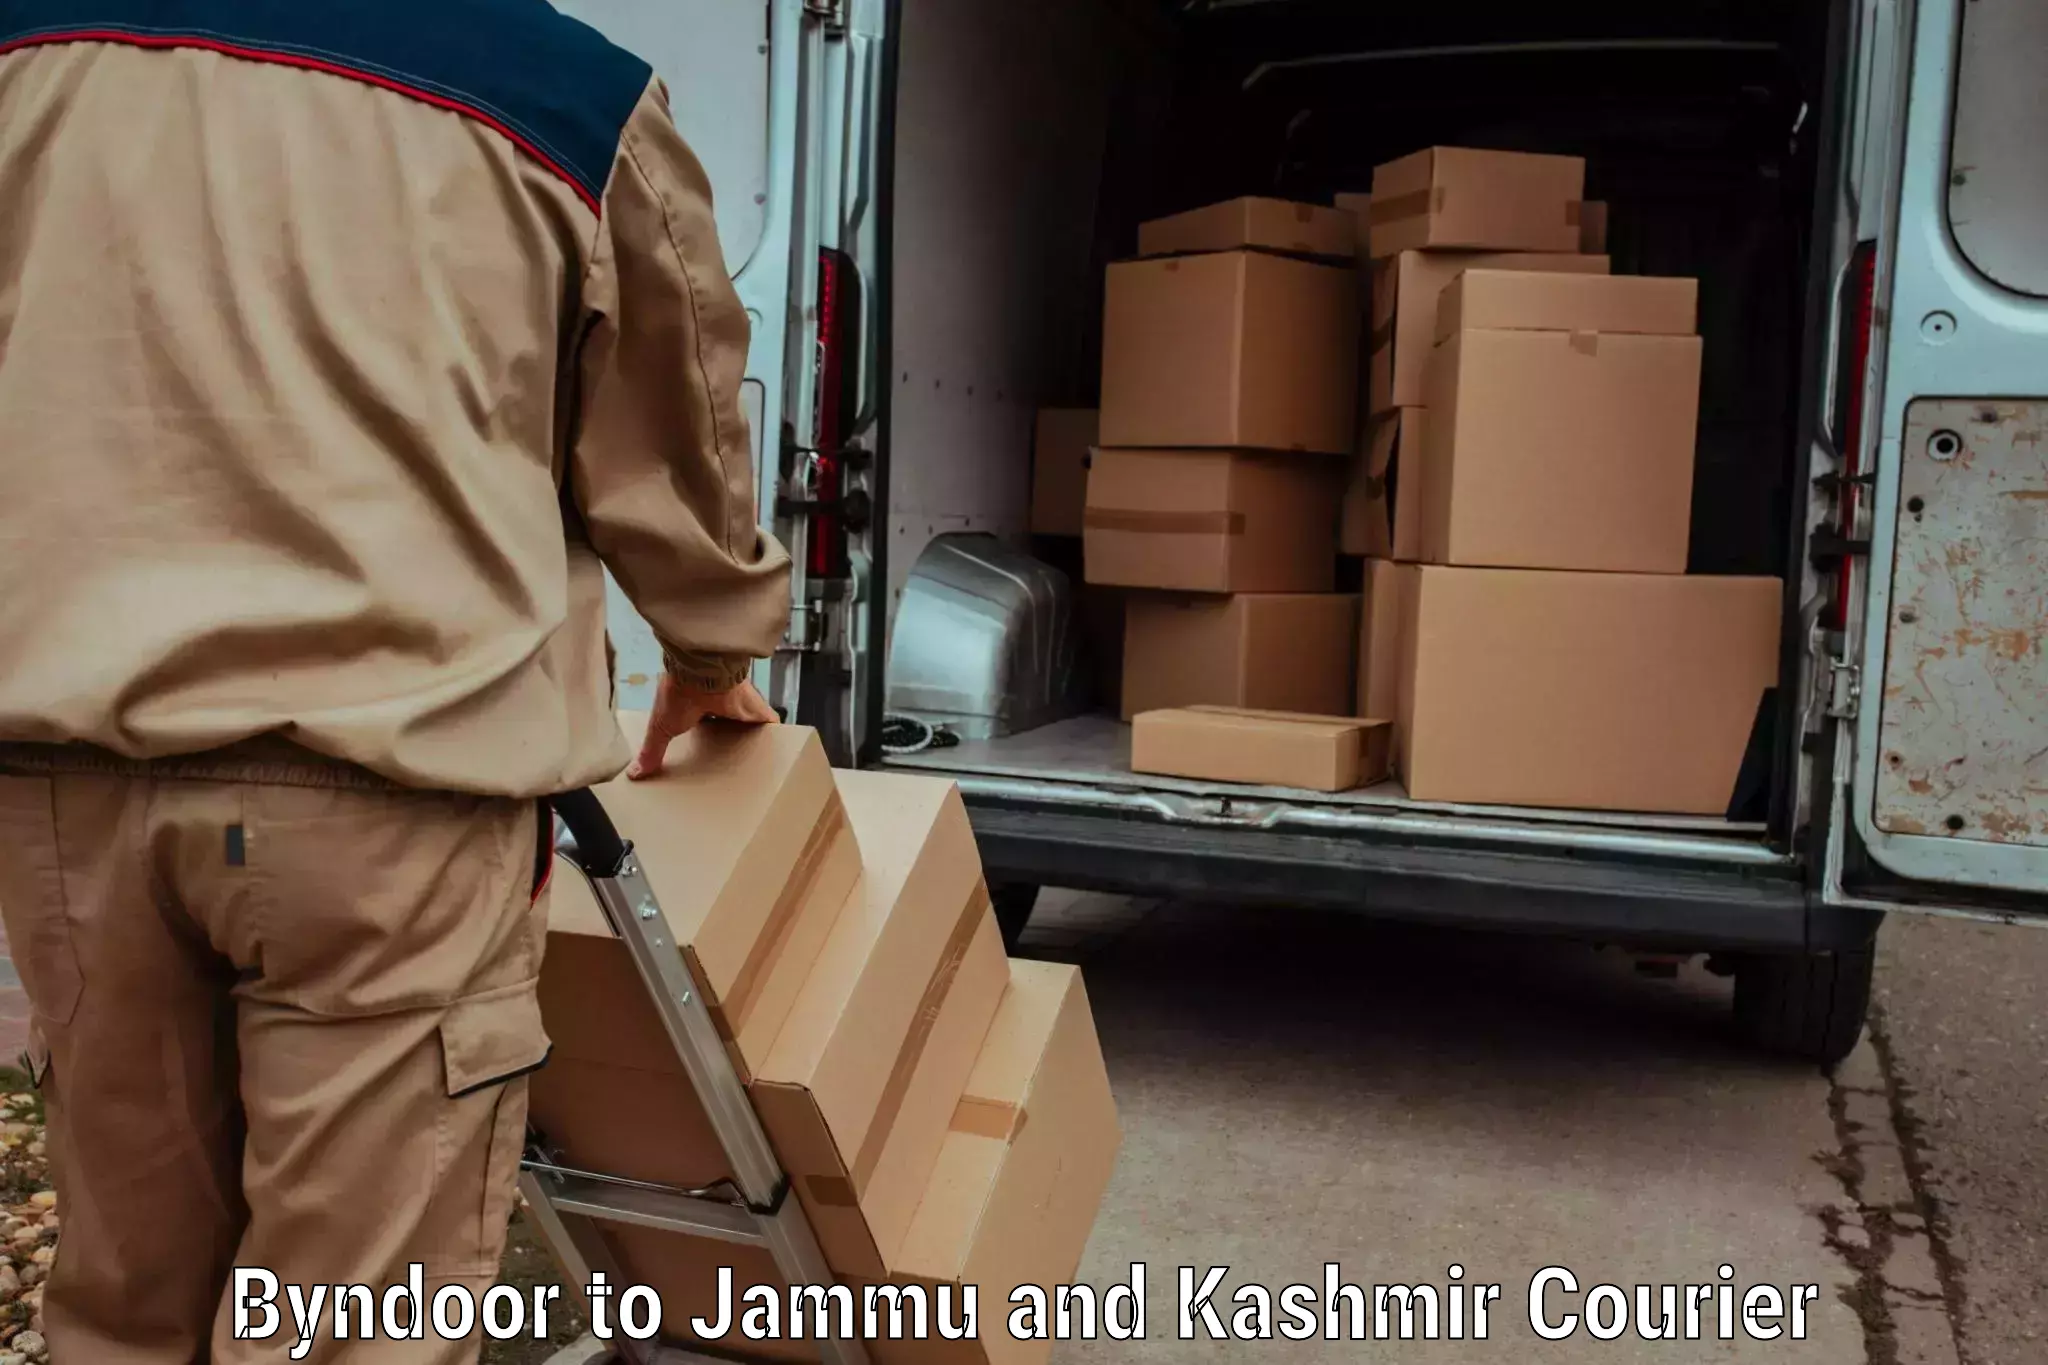 Easy access courier services in Byndoor to Bohri